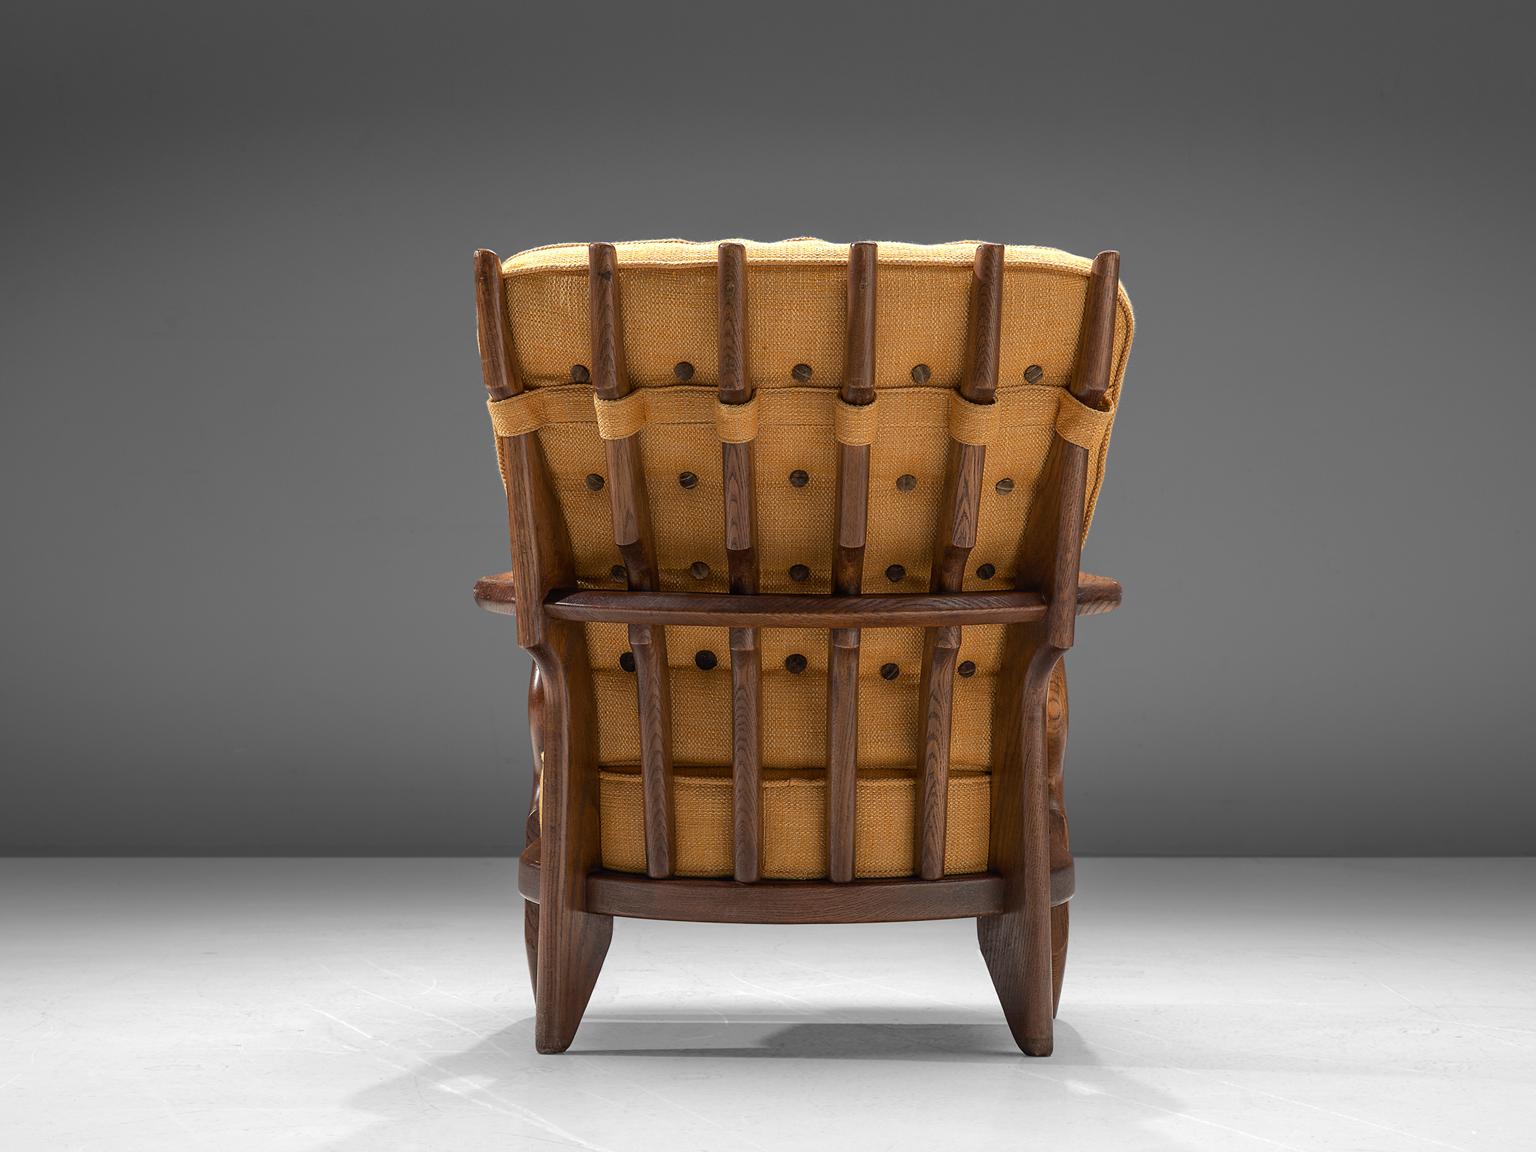 Guillerme et Chambron, lounge chair, oak and yellow upholstery, France, 1960s. 

Well sculpted Guillerme and Chambron 'Mid Repos' lounge chair, in solid oak with the typical characteristic decorative details at the back and capricious forms of the